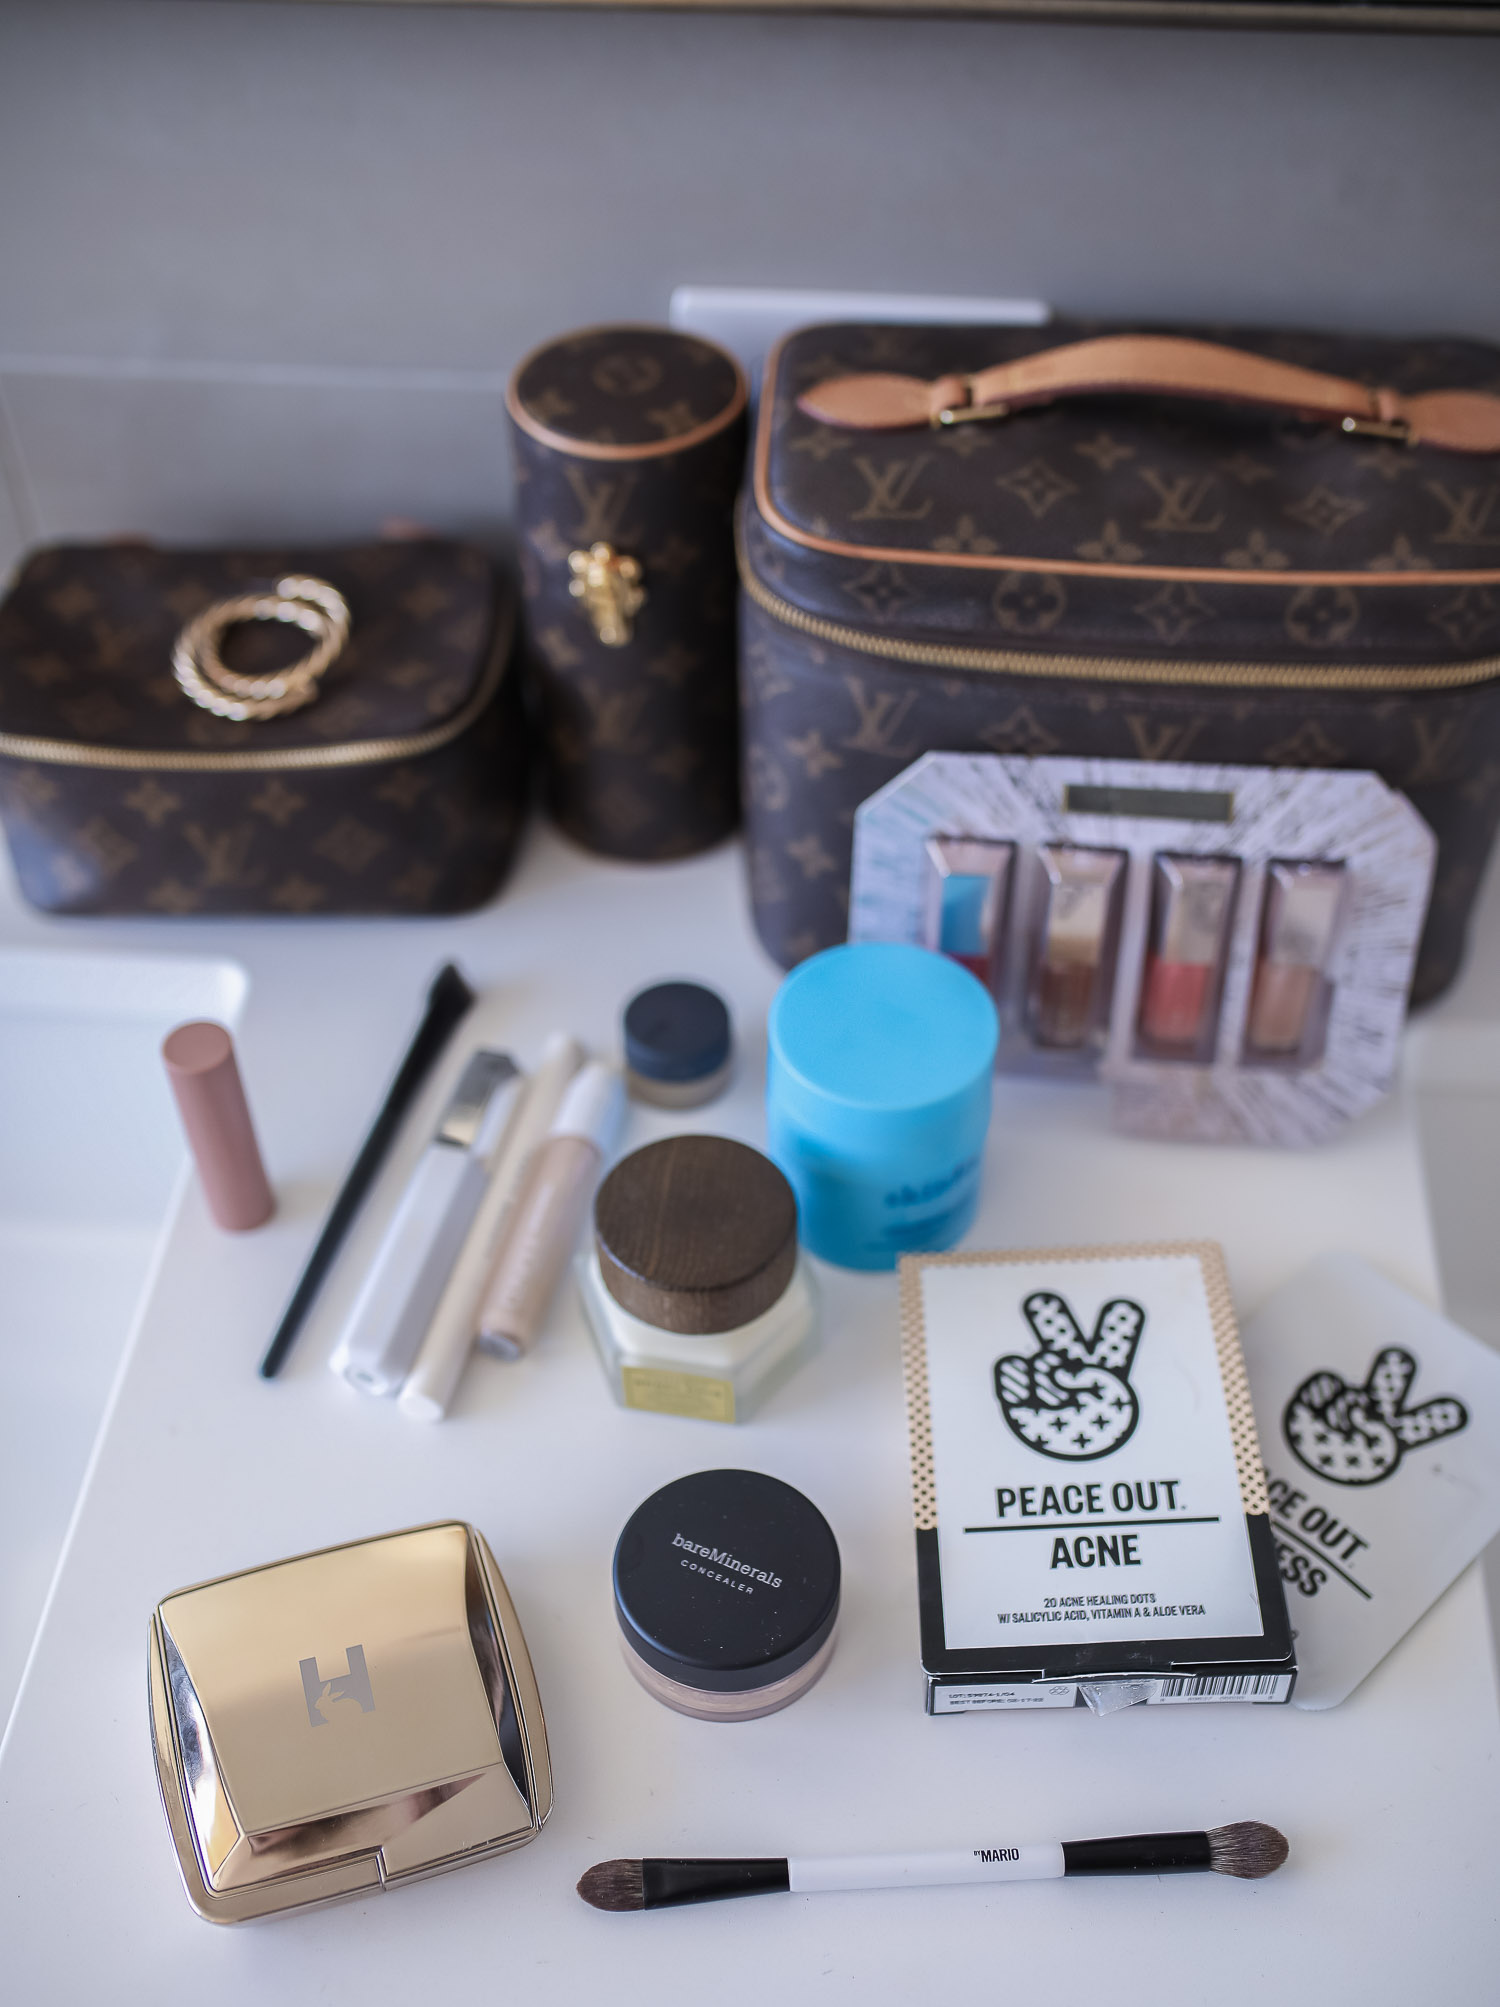 Sephora savings event fall 2020, sephora VIB sale event, beauty blogger sephora favorites fall 2020, emily ann gemma-10 |Sephora Beauty Insider Sale by popular US beauty blog, The Sweetest Thing: image of Louis Vuitton makeup and jewelry cases next to Sephroa beauty products. 